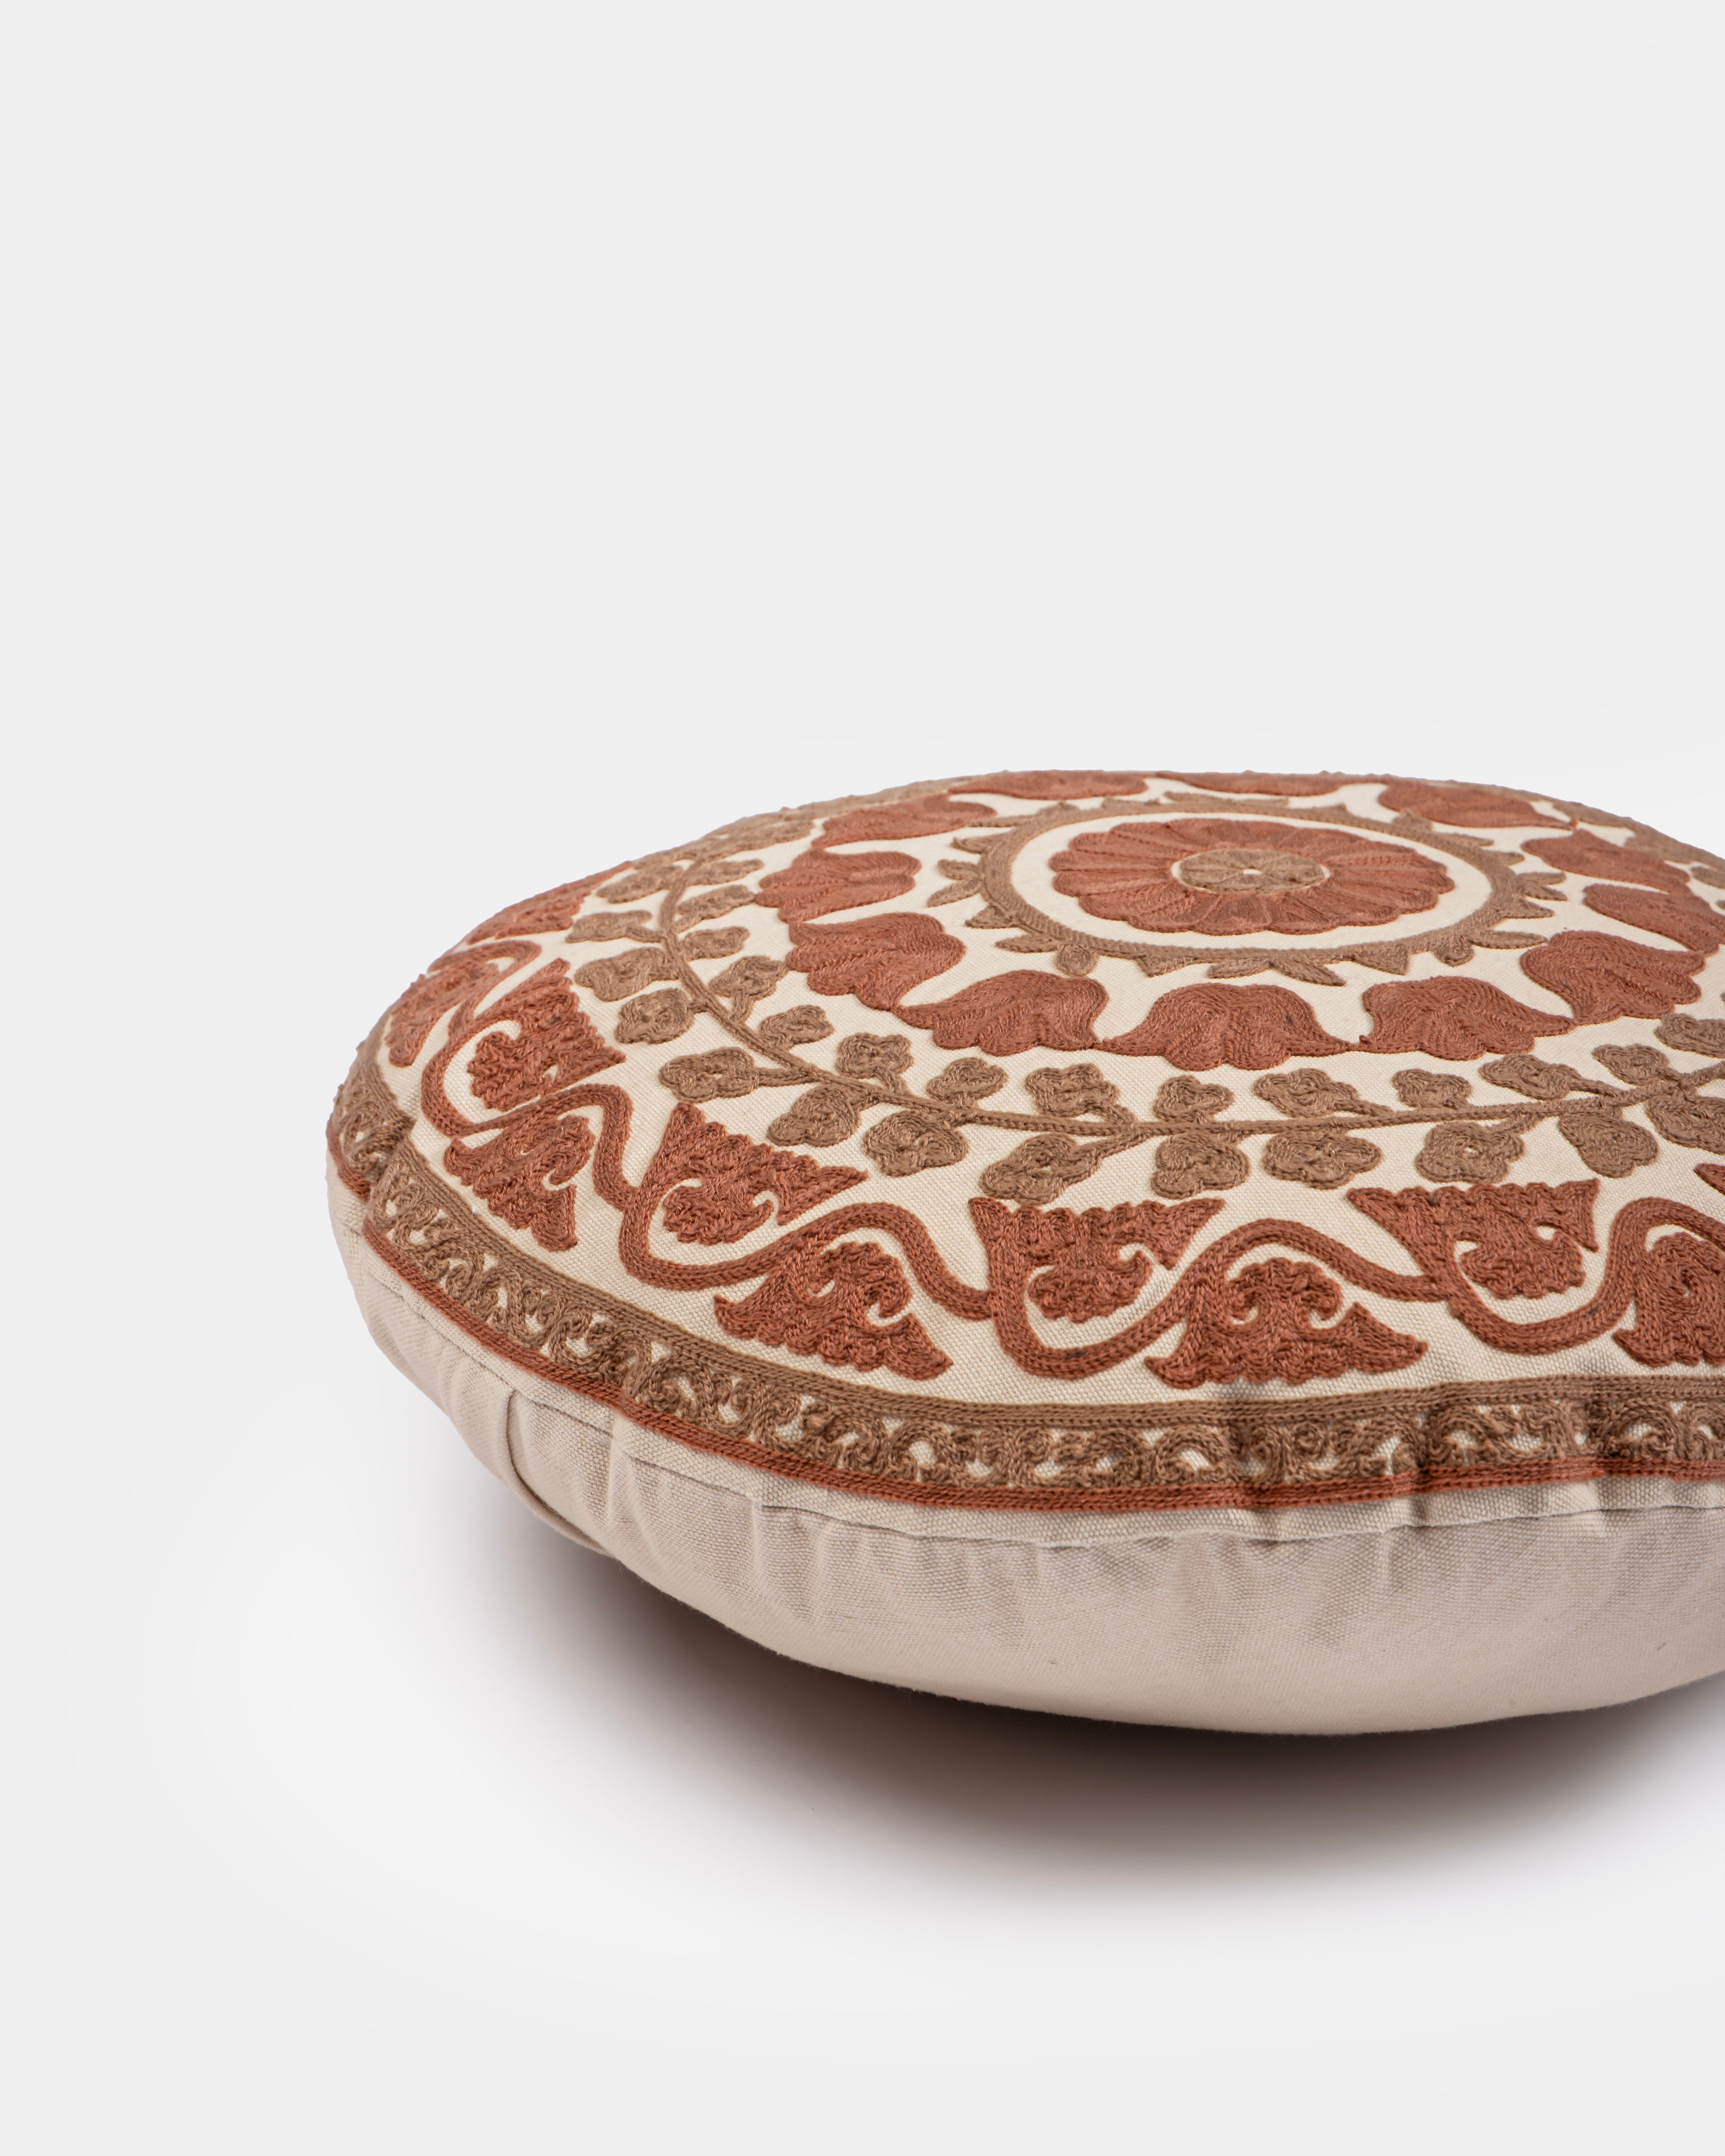 Suzani Pillow | Red Pillow Cover Flora 16" Round | Made in Jaipur